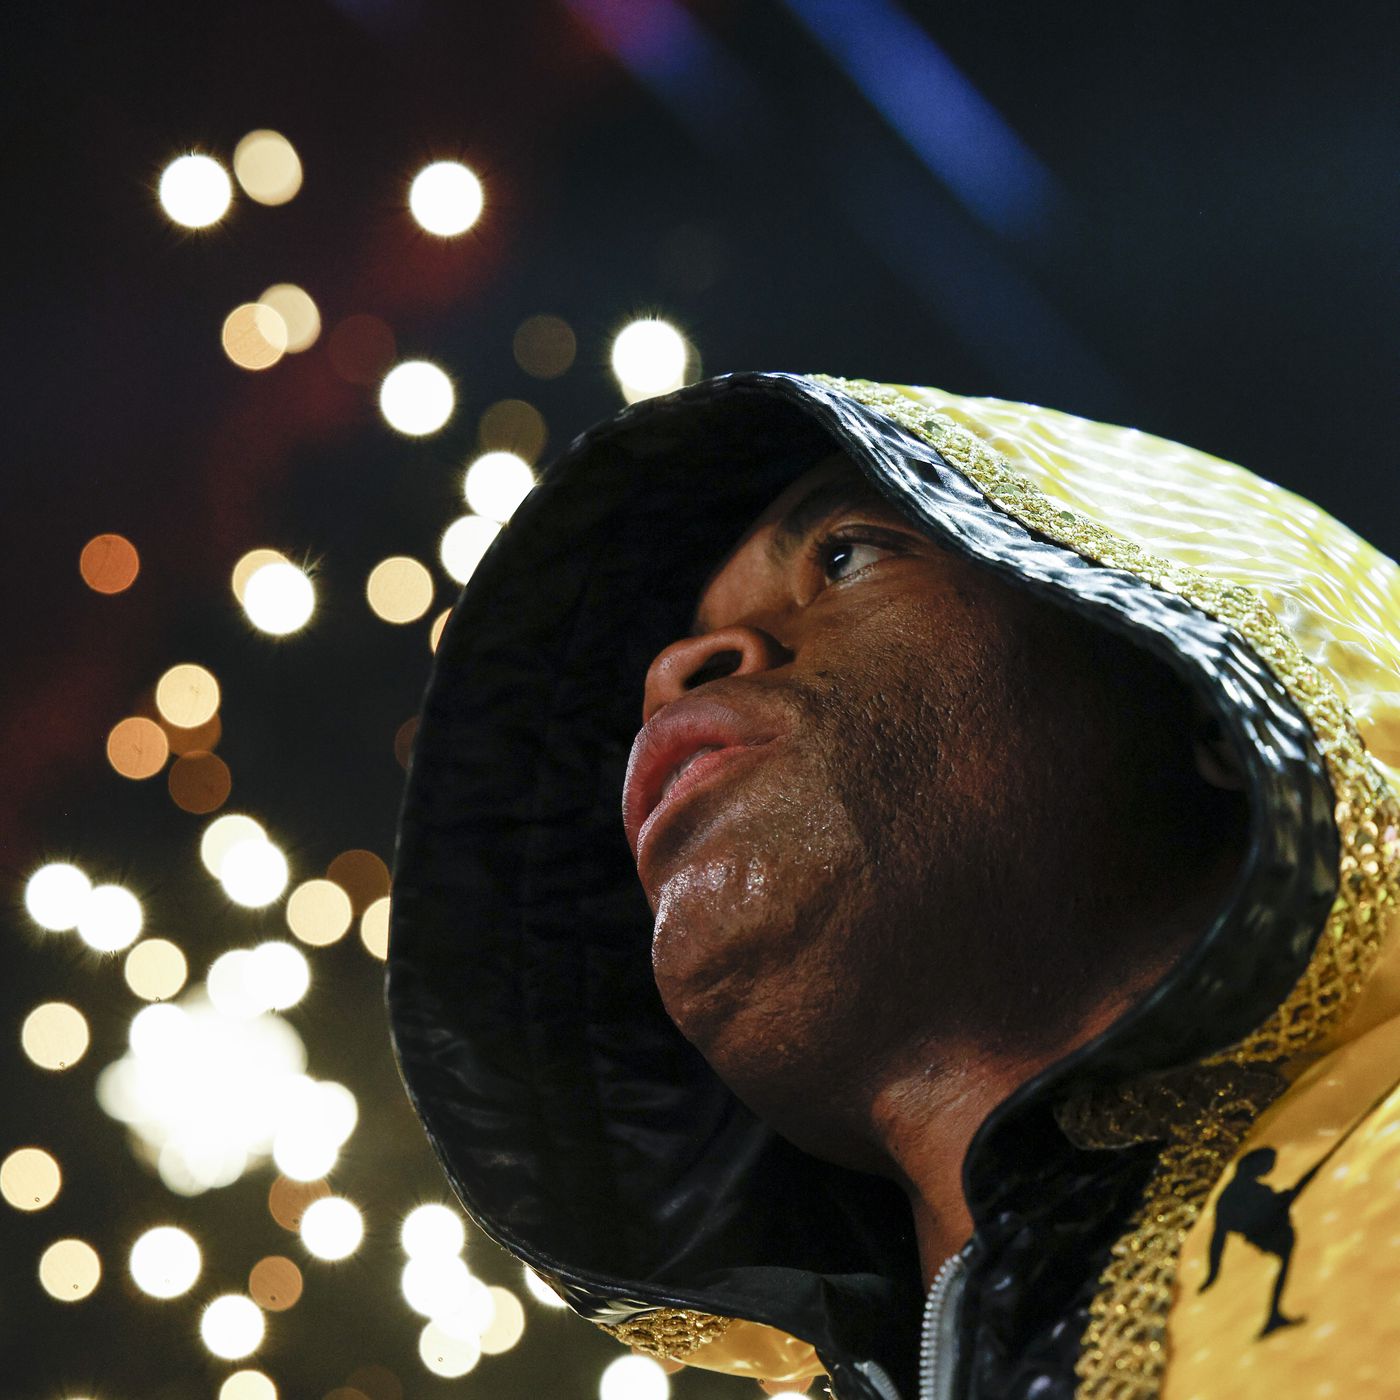 Time Check! When will Floyd Mayweather, Anderson Silva make their walks to  the boxing ring today on PPV? - MMAmania.com